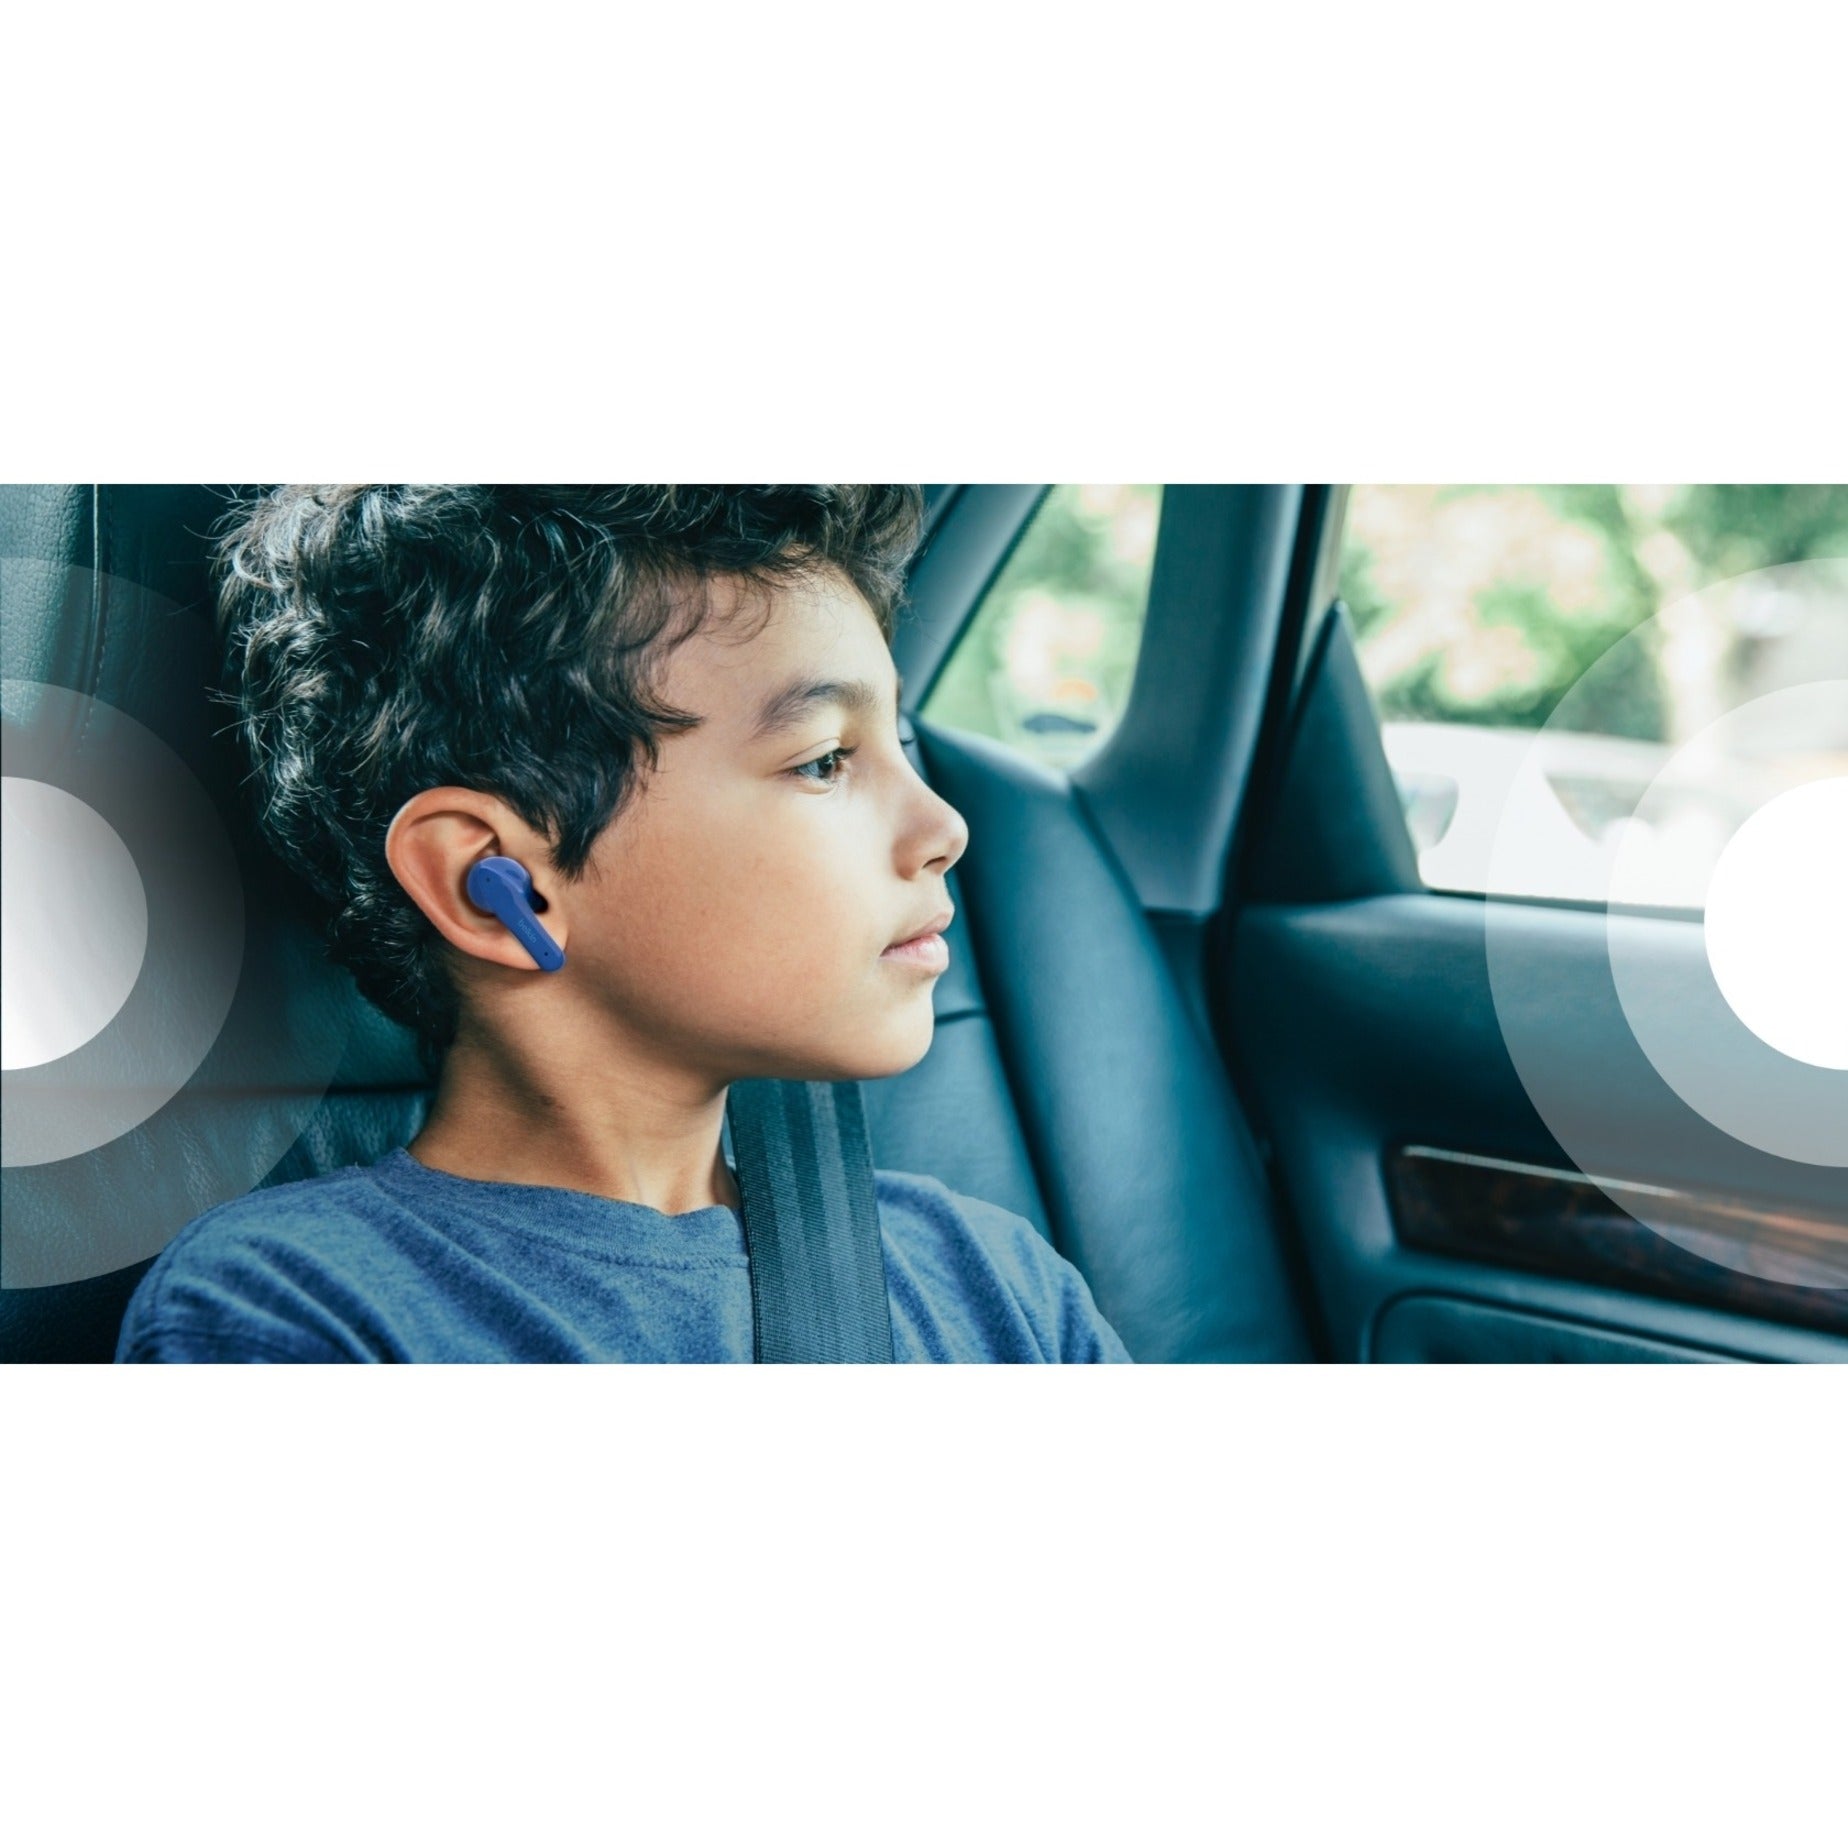 Belkin PAC003BTBL SOUNDFORM Nano Wireless Earbuds for Kids, Bluetooth 5.0, Blue, Sweat and Water Resistant